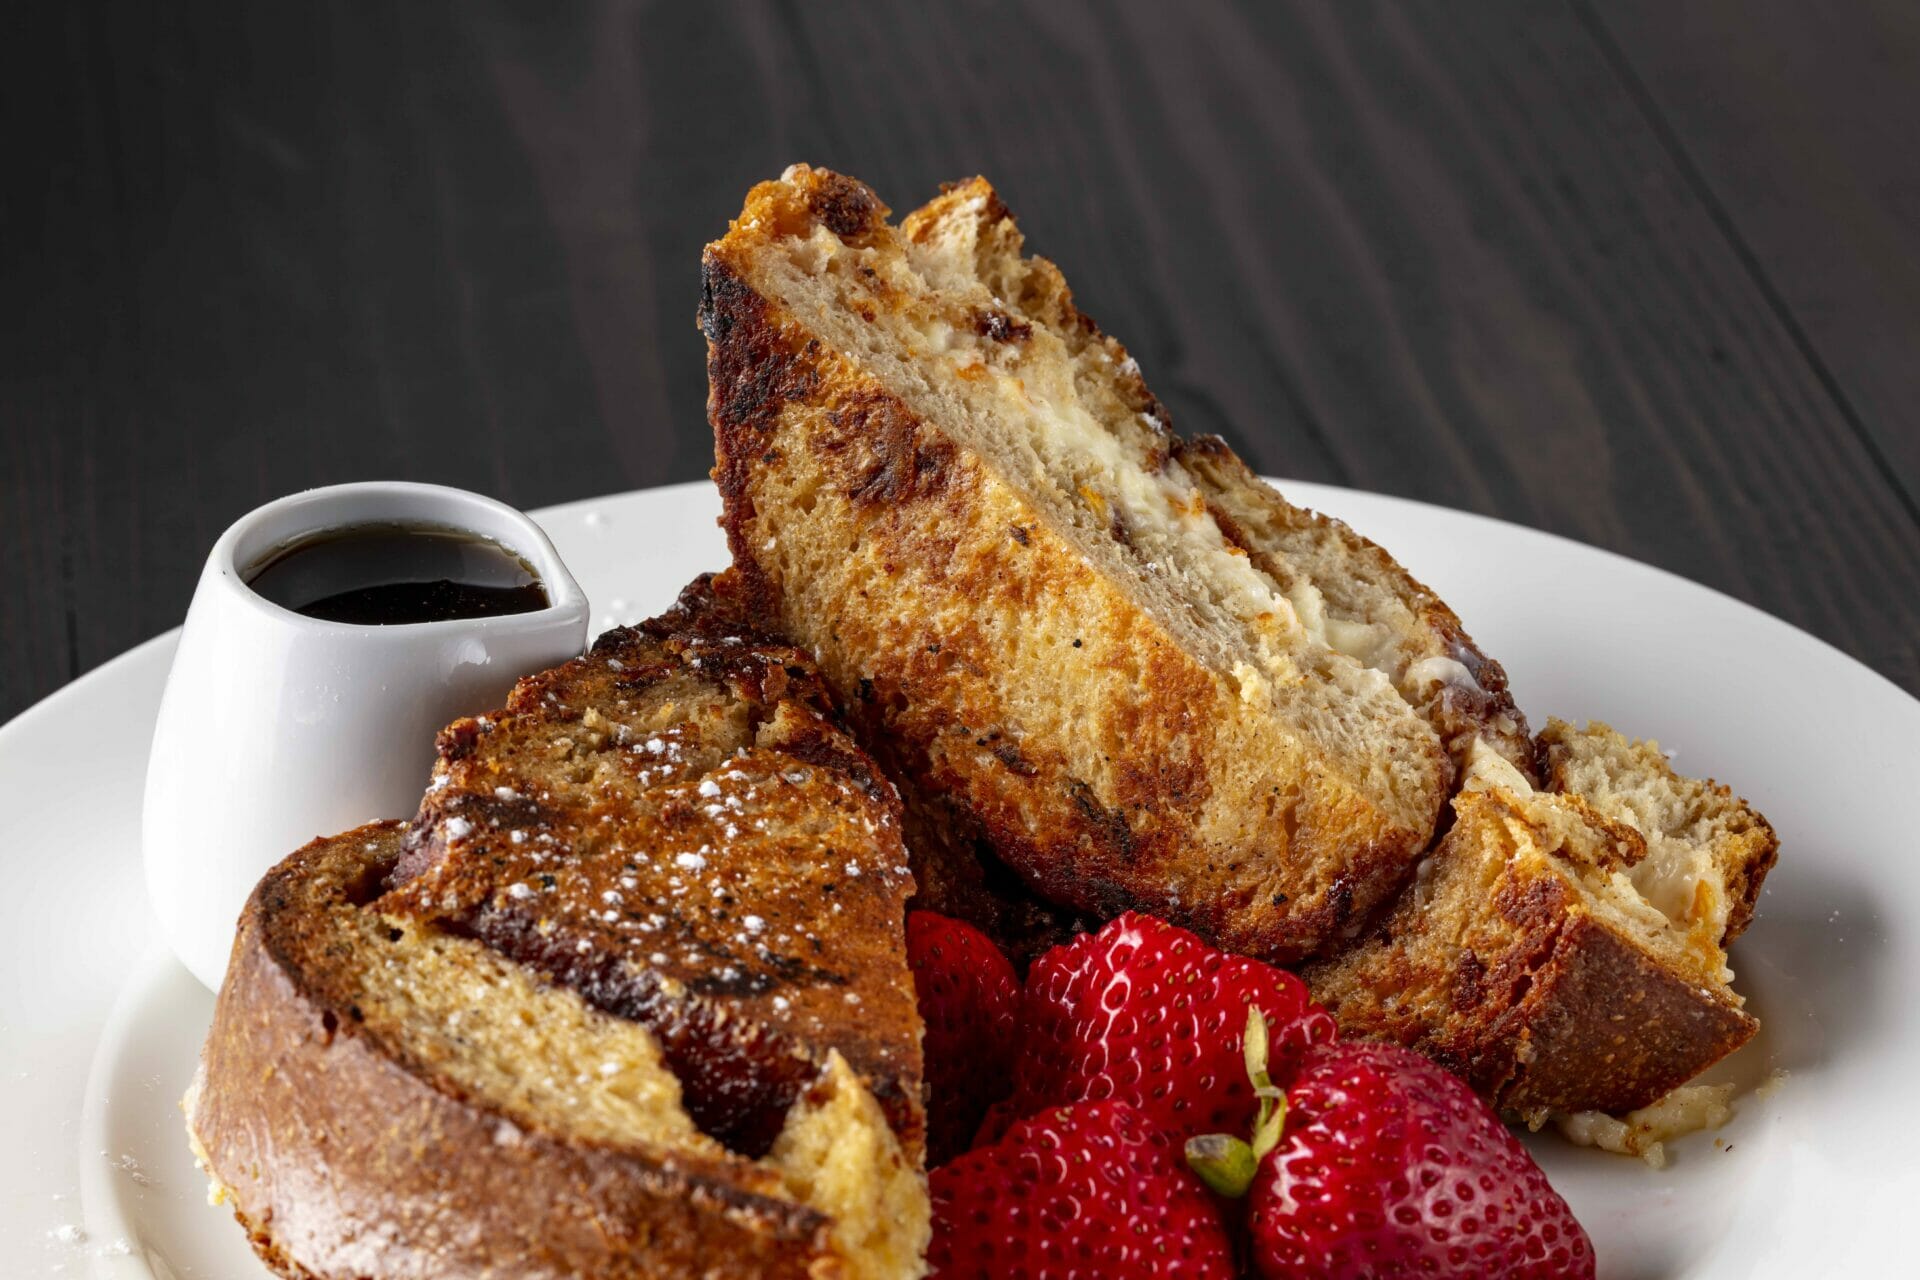 Weekend Bubbles & Brunch
<br>$44 for Two